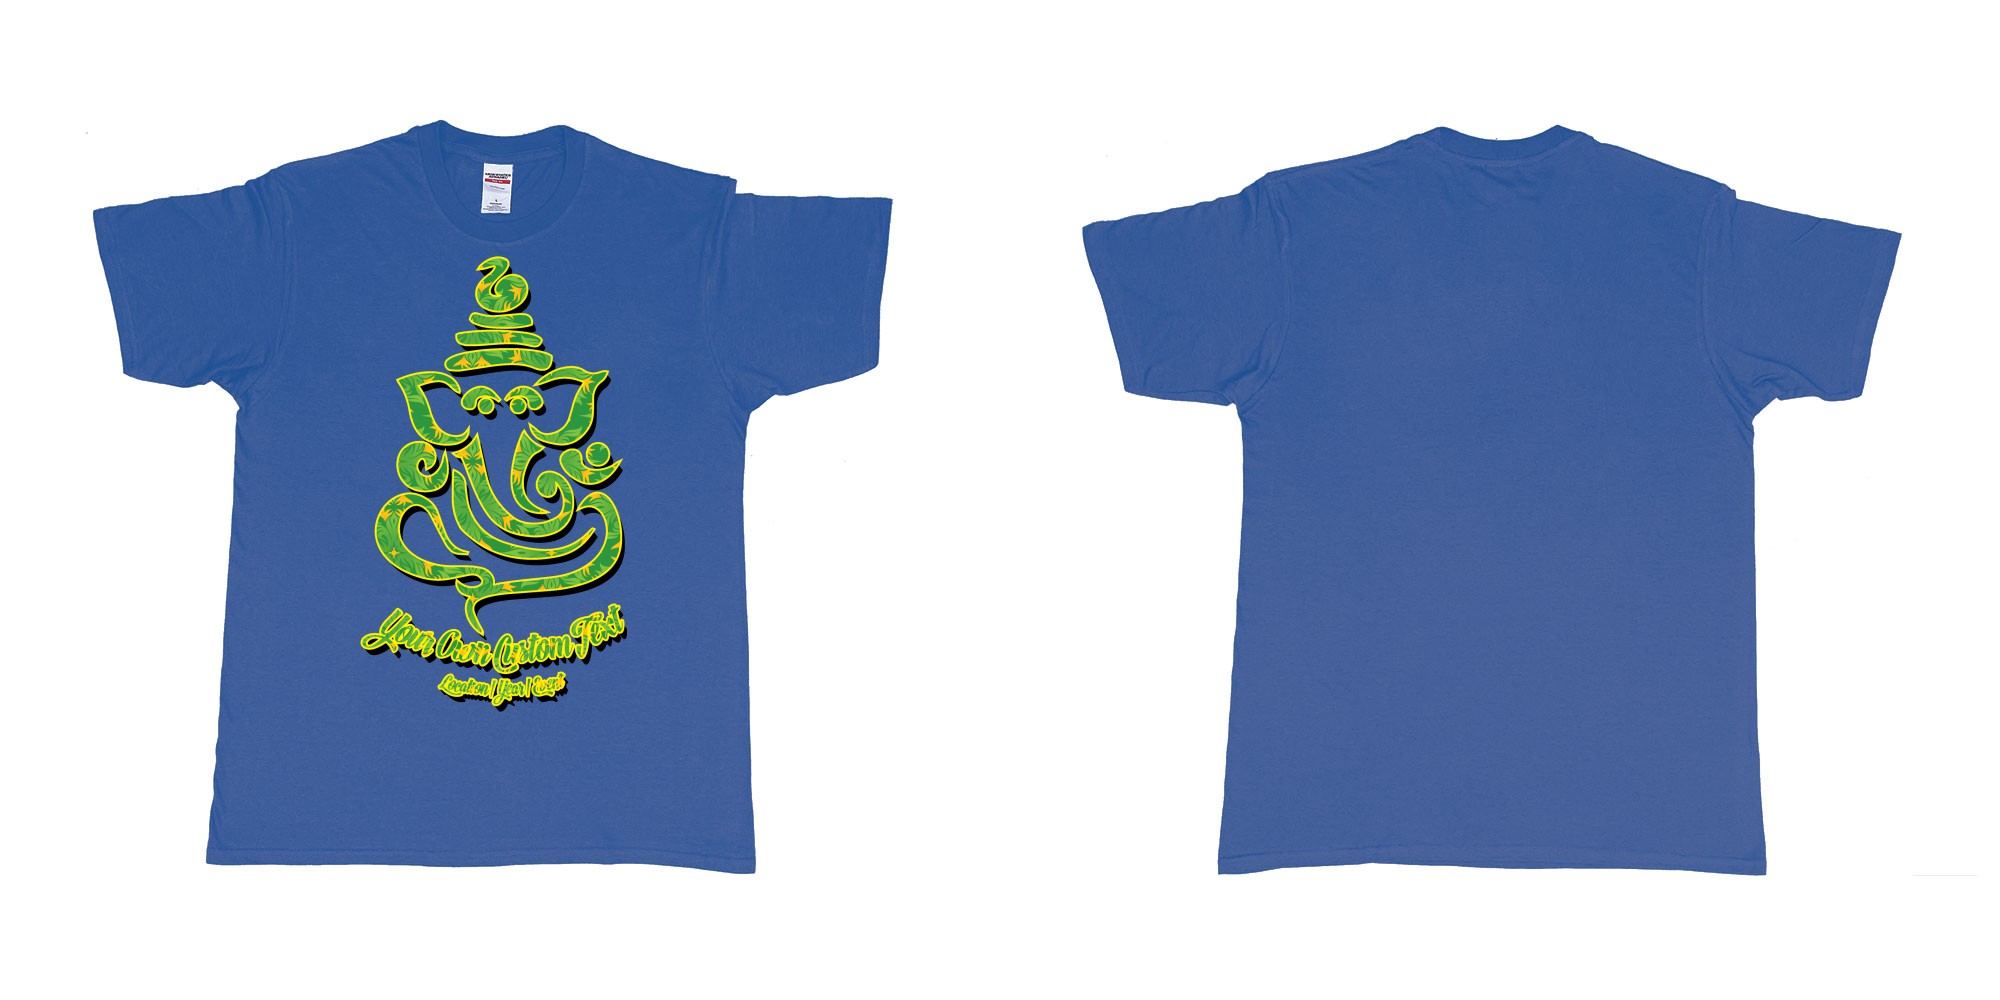 Custom tshirt design ganesh soft jungle yoga customize own design in fabric color royal-blue choice your own text made in Bali by The Pirate Way